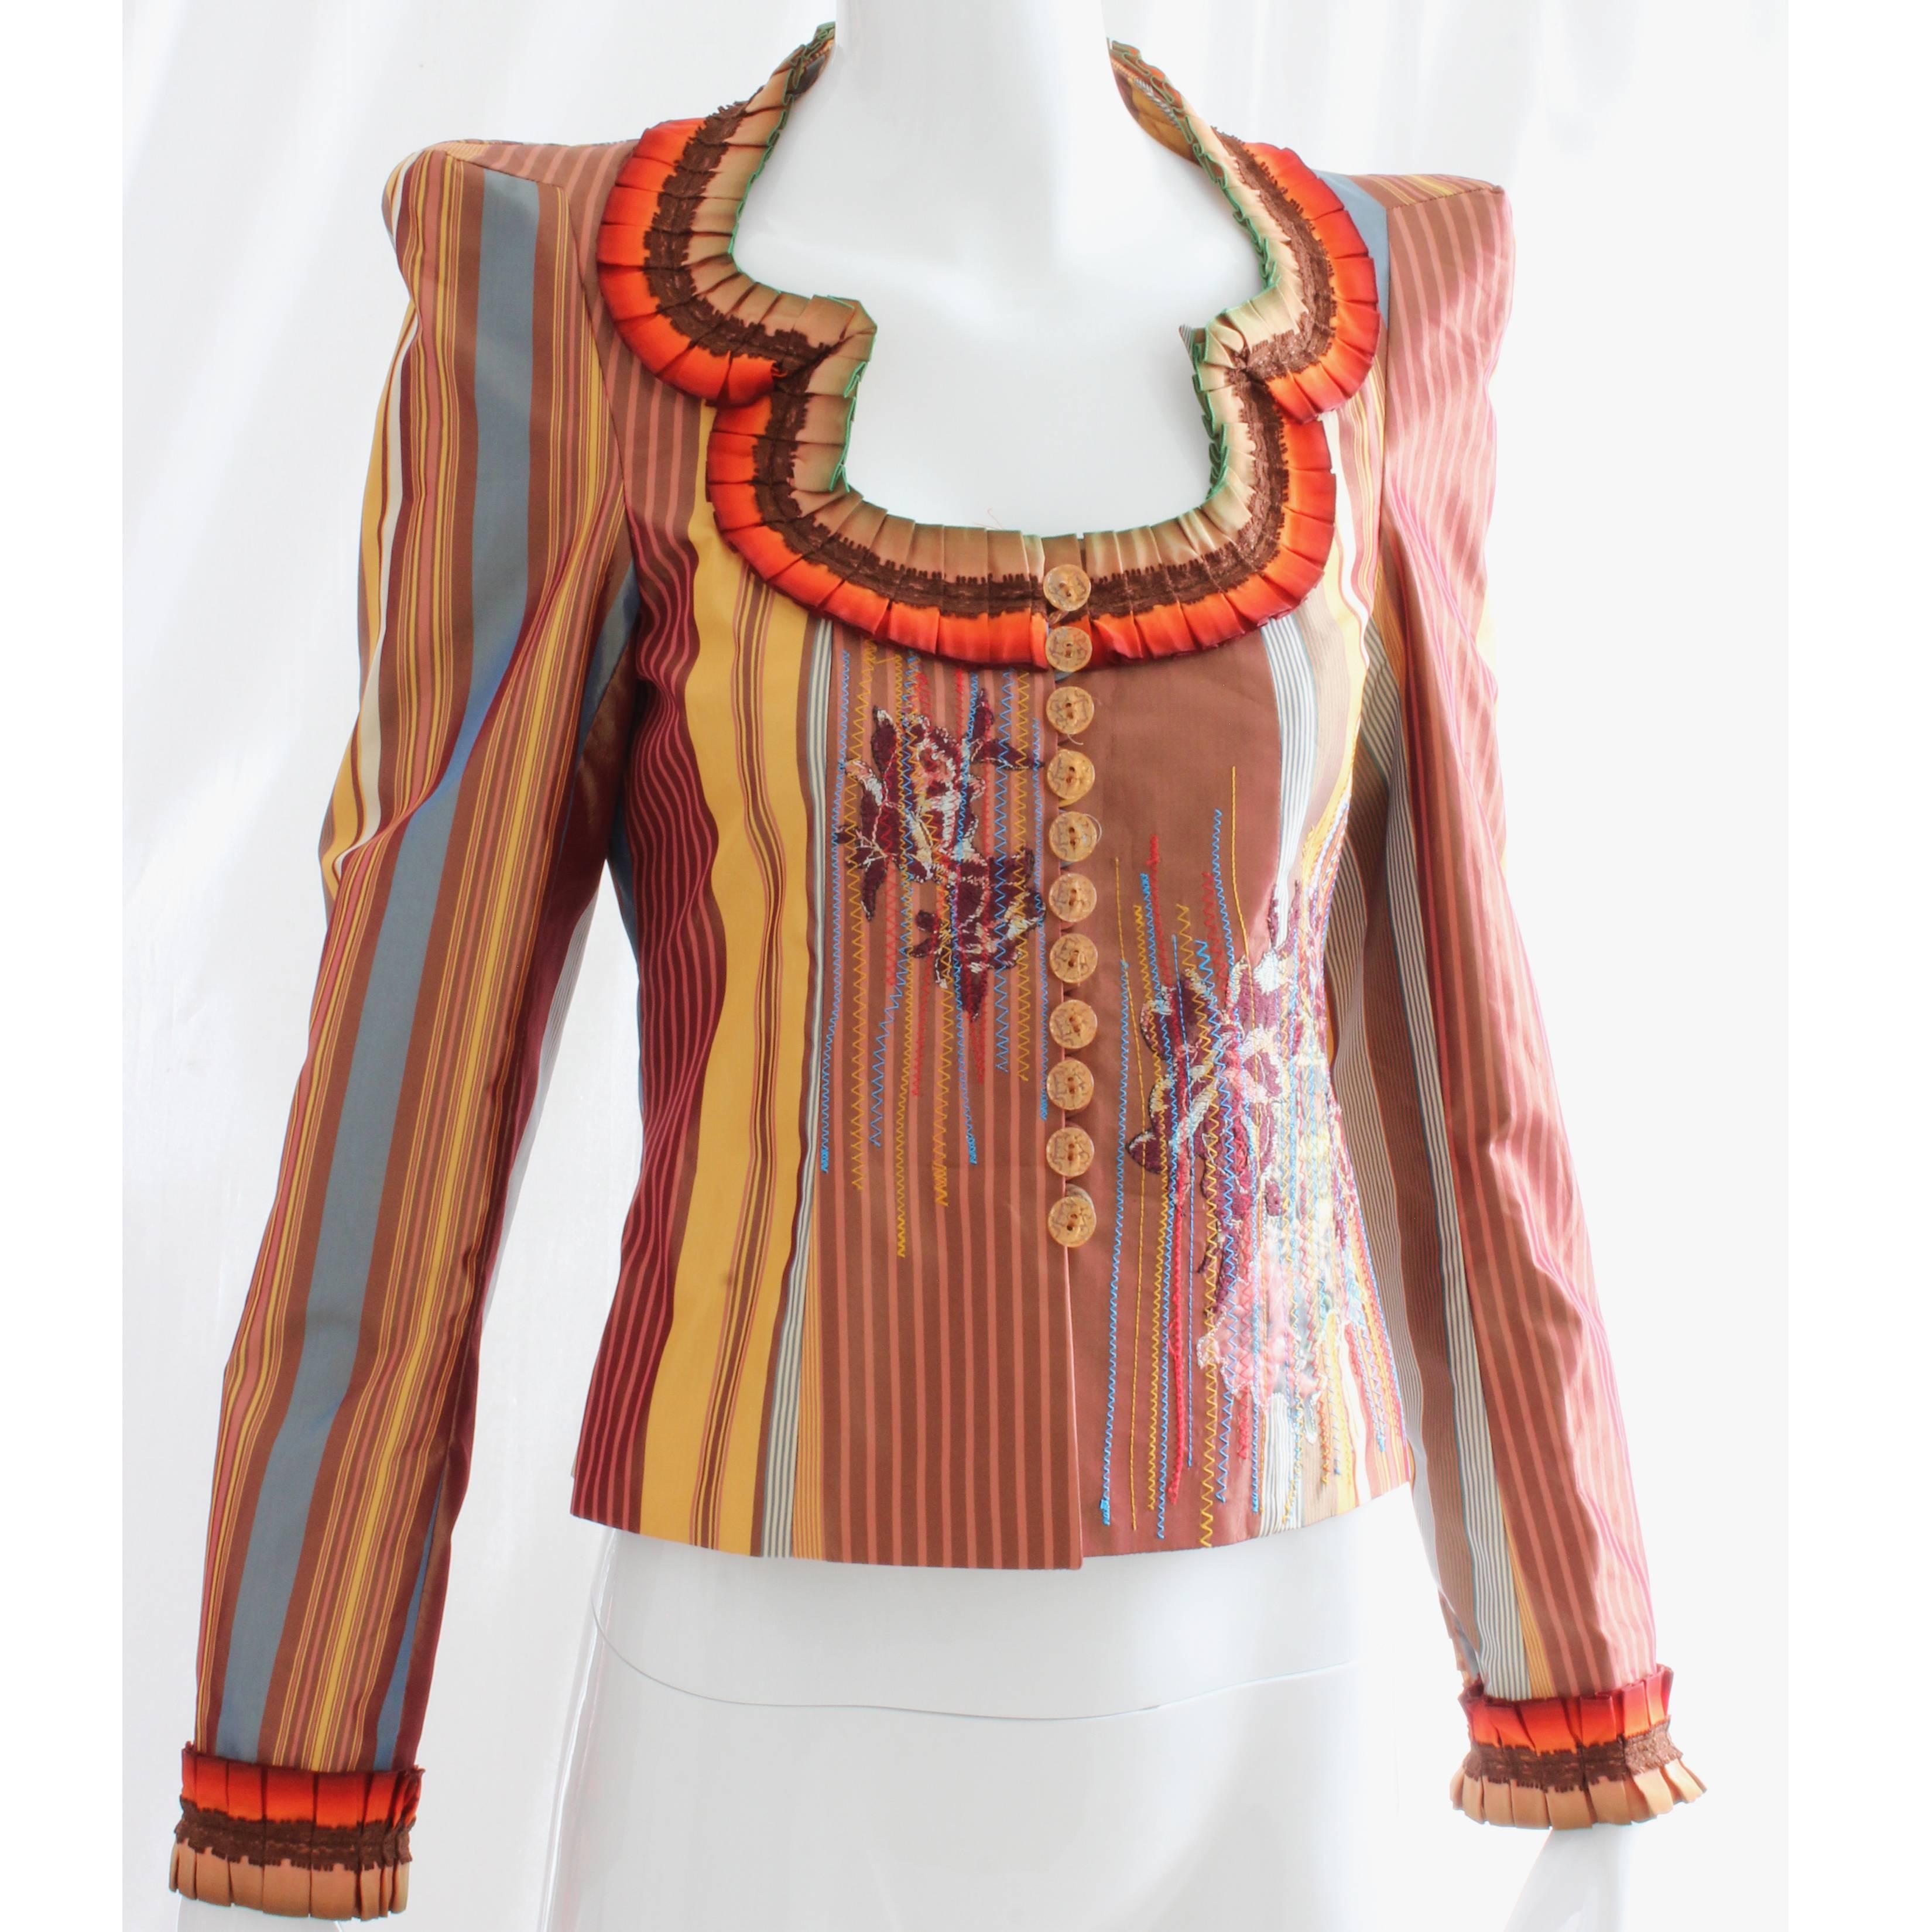 Christian Lacroix Silk Jacket with Stripes, Tapestry + Ruffles New Tags sz36 2